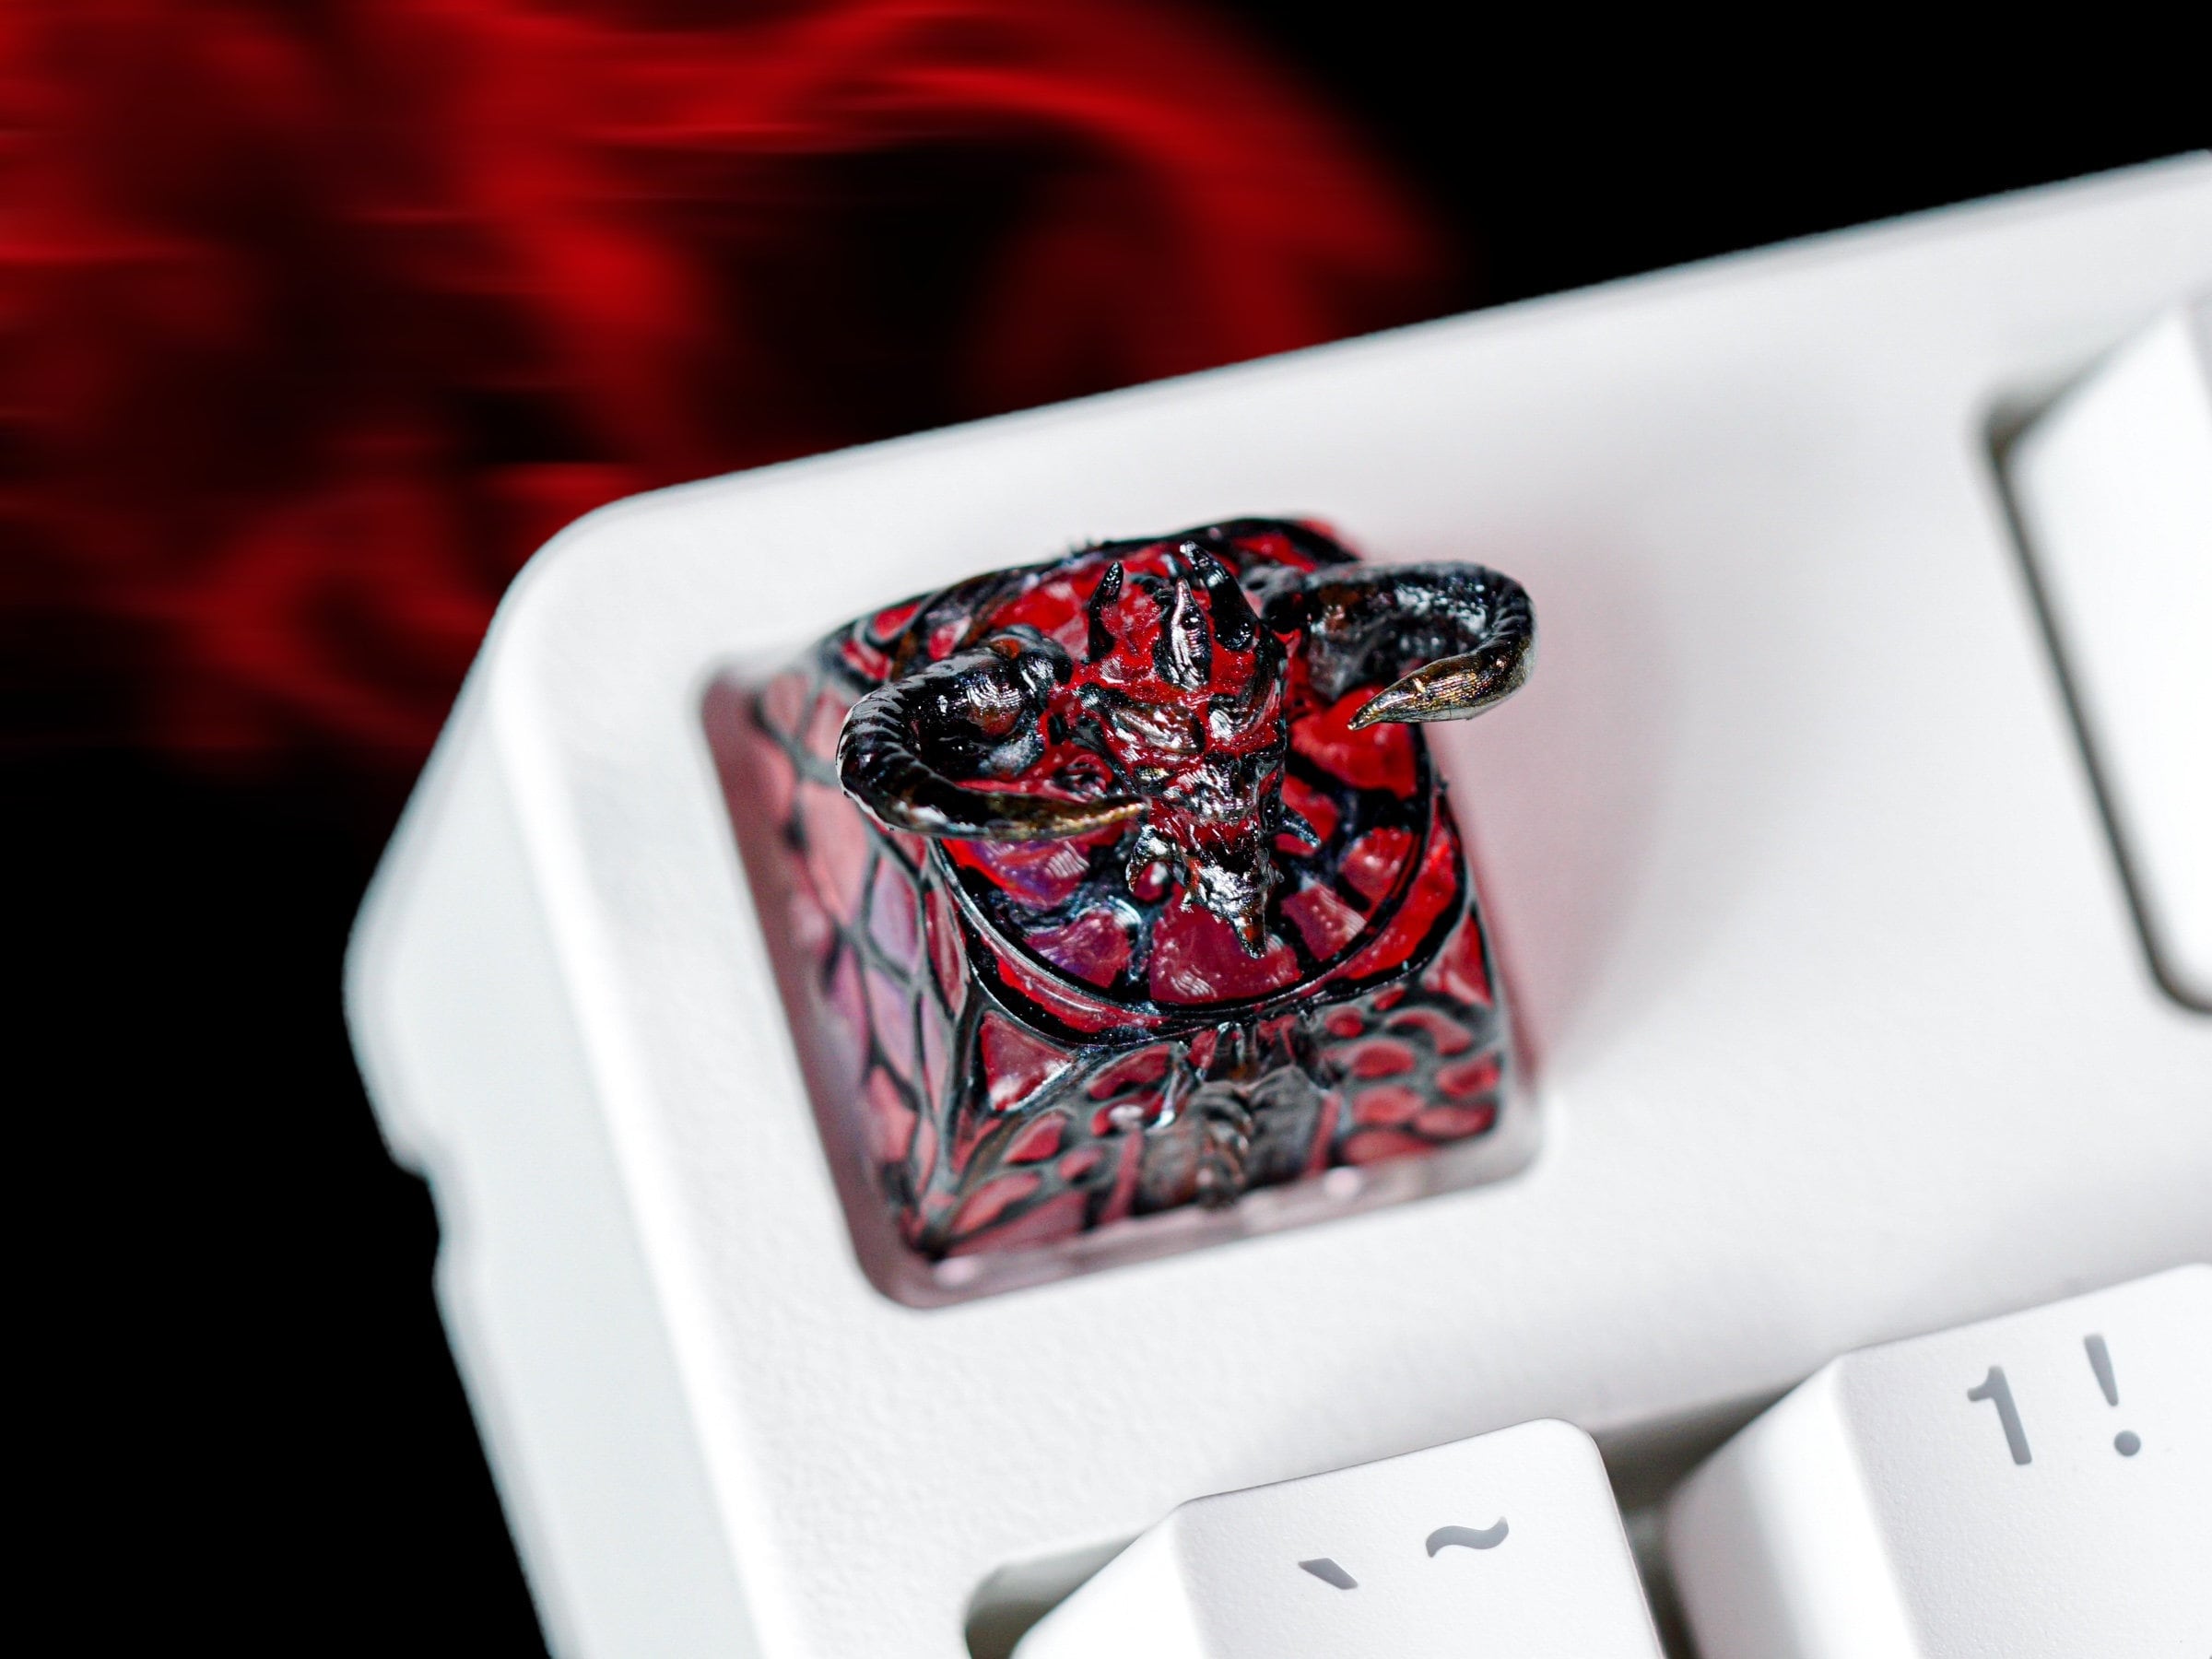 Di-a.blo IV Keycap, Gaming Keycap, Keycap For Cherry MX Switches Mechanical Keyboard, Gift for Him